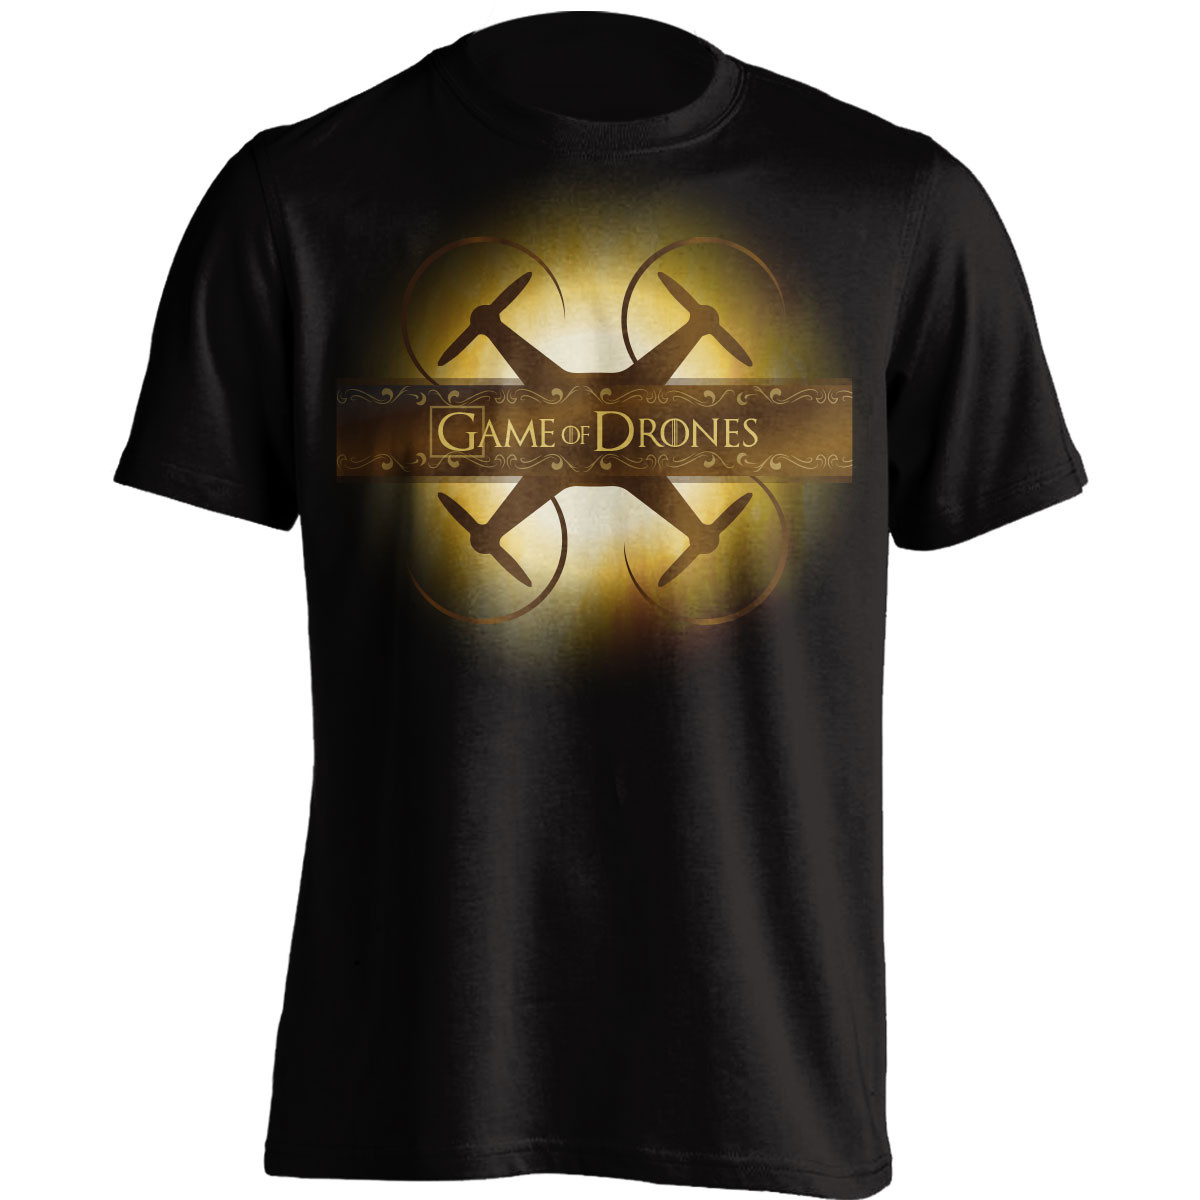 "Game Of Drones" Drone Flying T-Shirt